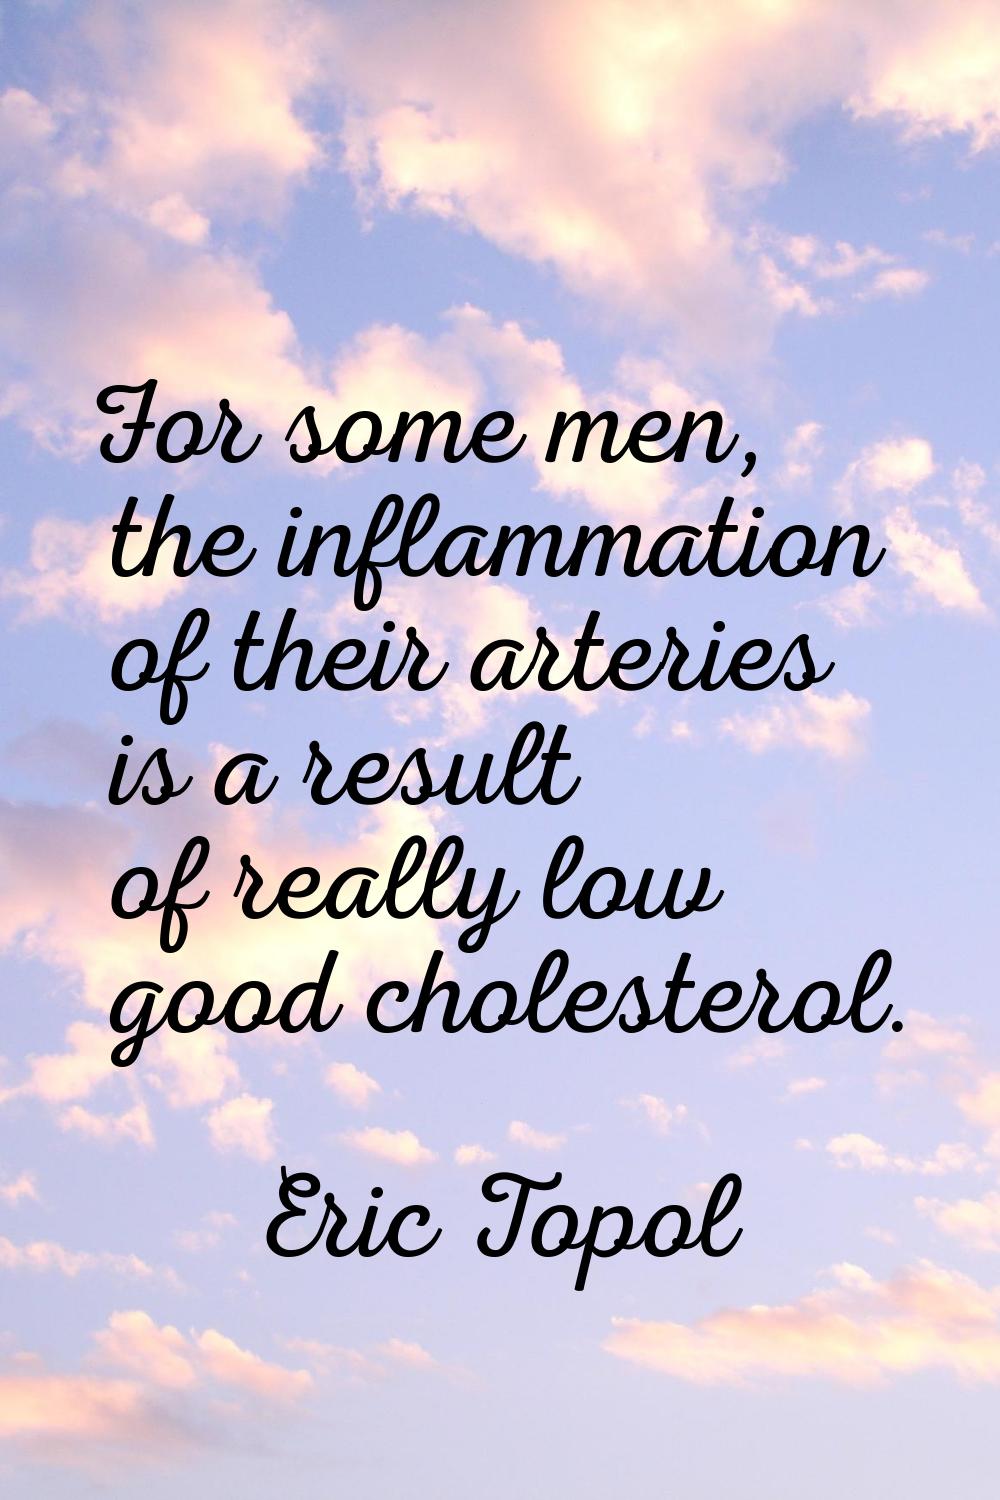 For some men, the inflammation of their arteries is a result of really low good cholesterol.